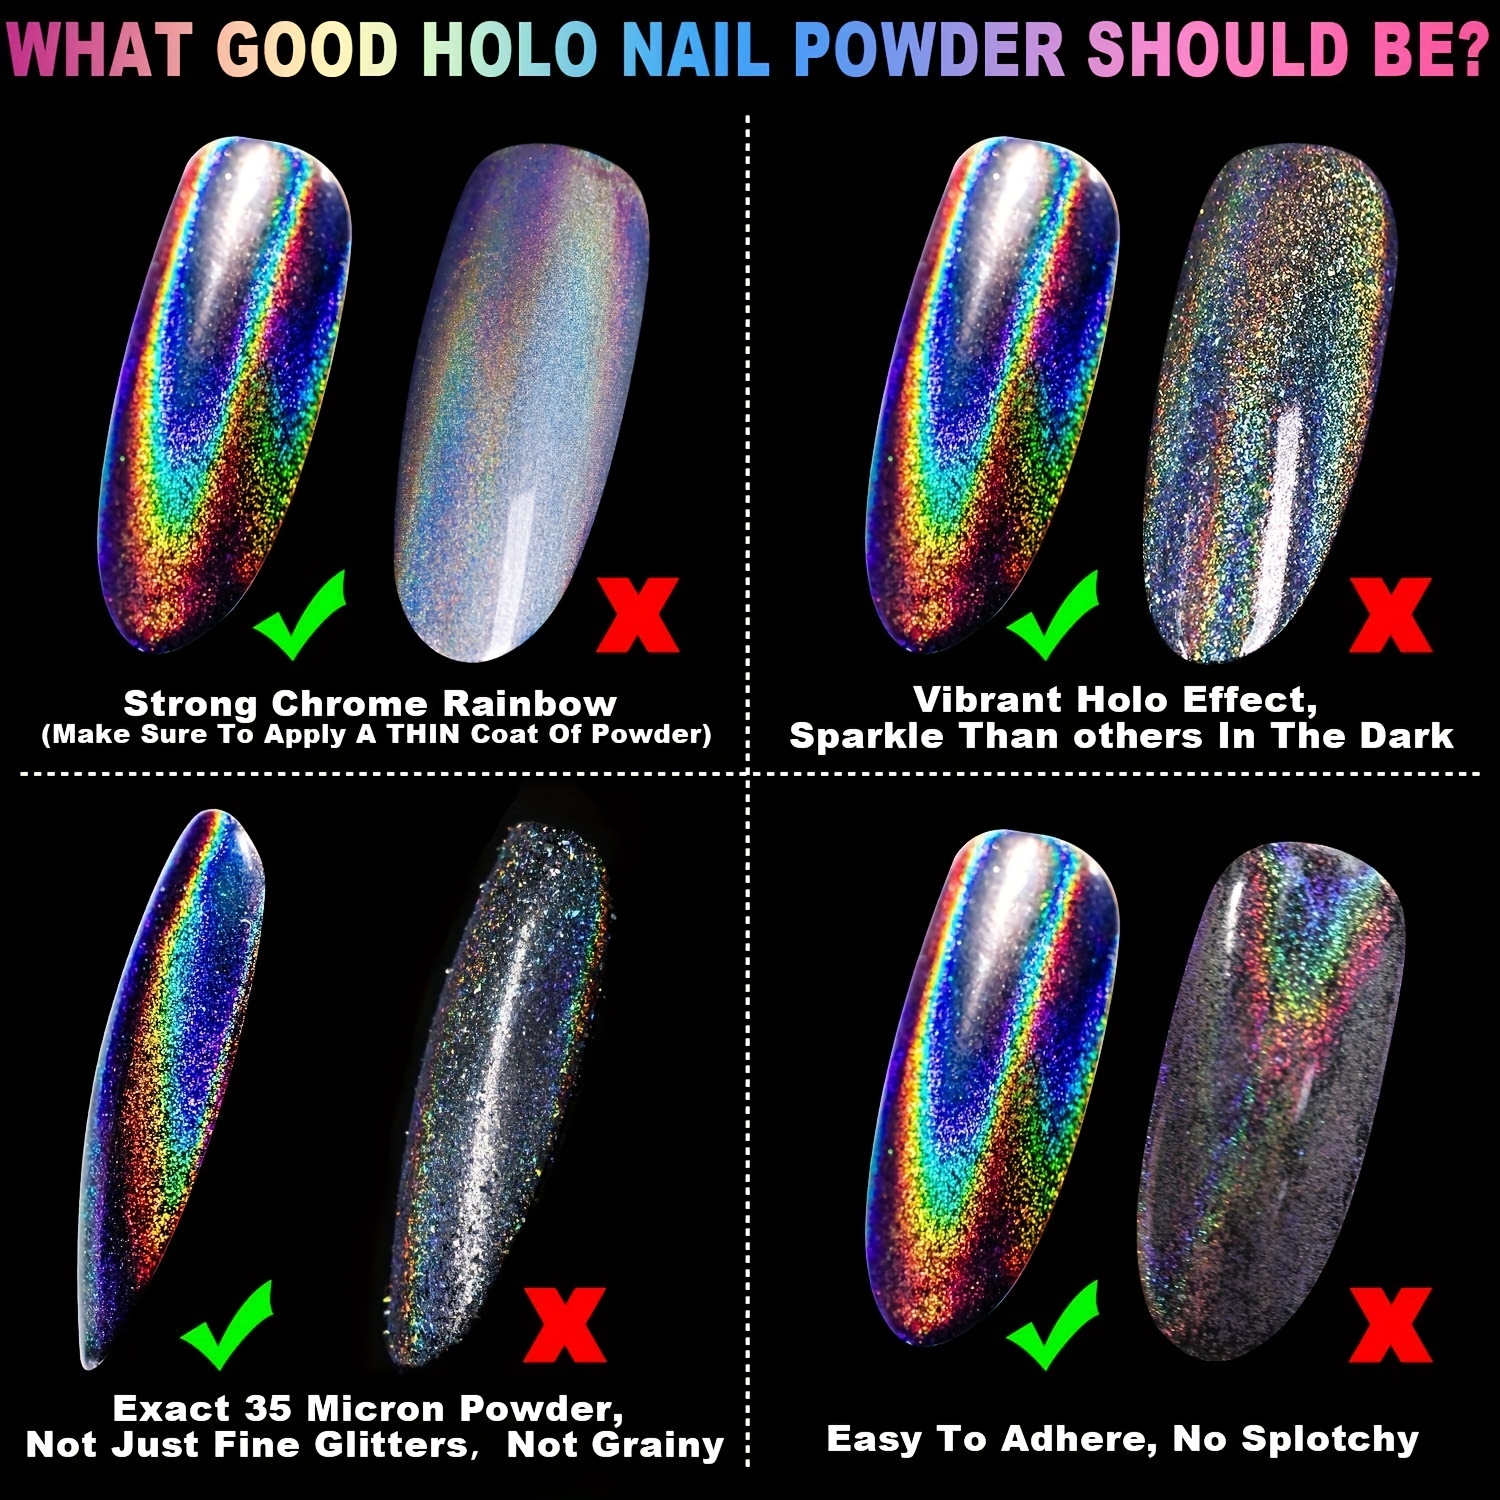 Whats Up Nails - Holographic Powder for Rainbow Unicorn Nails